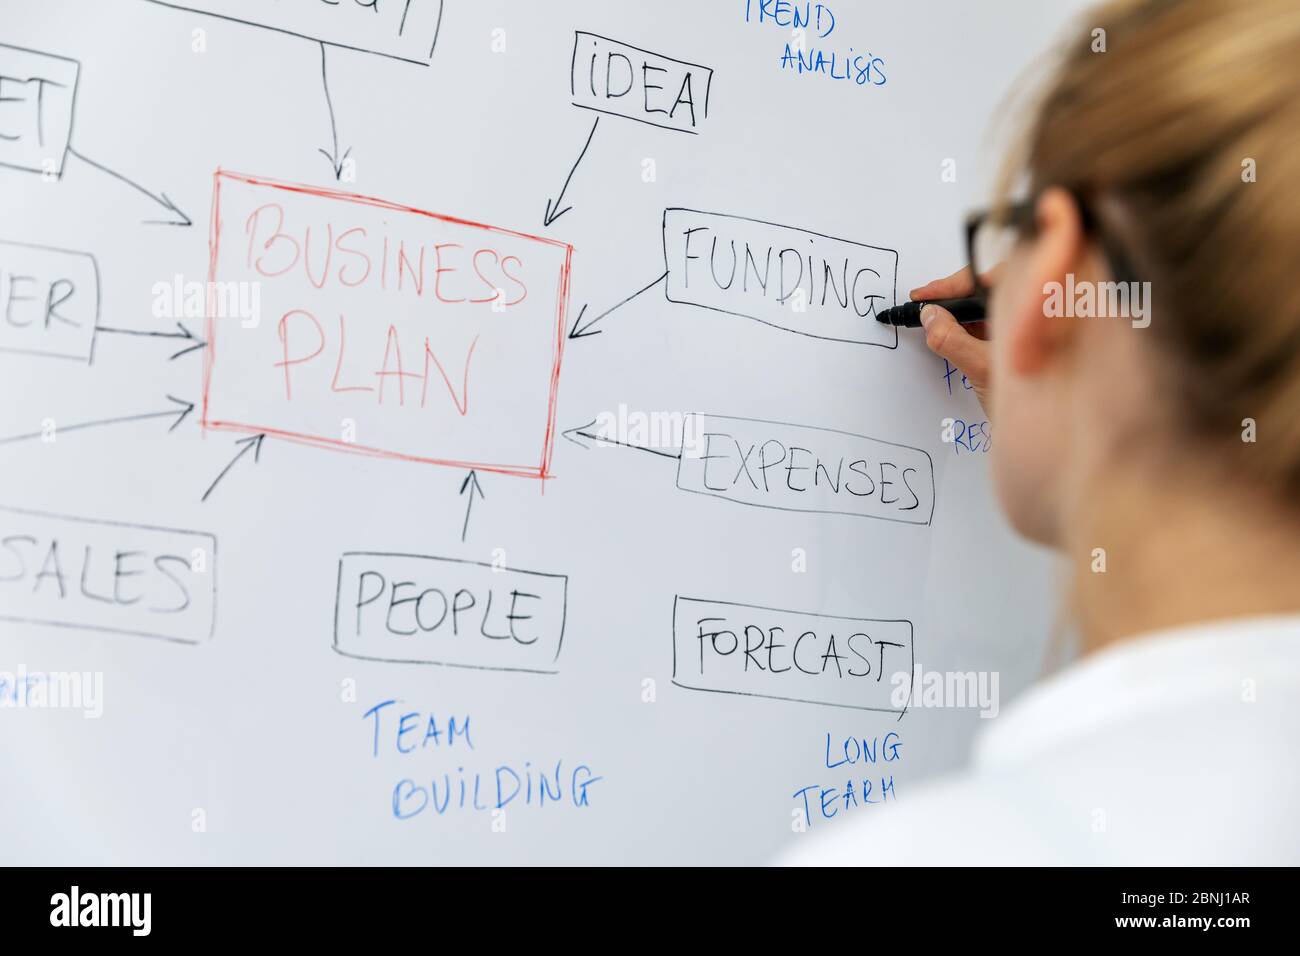 woman writing business plan outline with marker on whiteboard Stock Photo